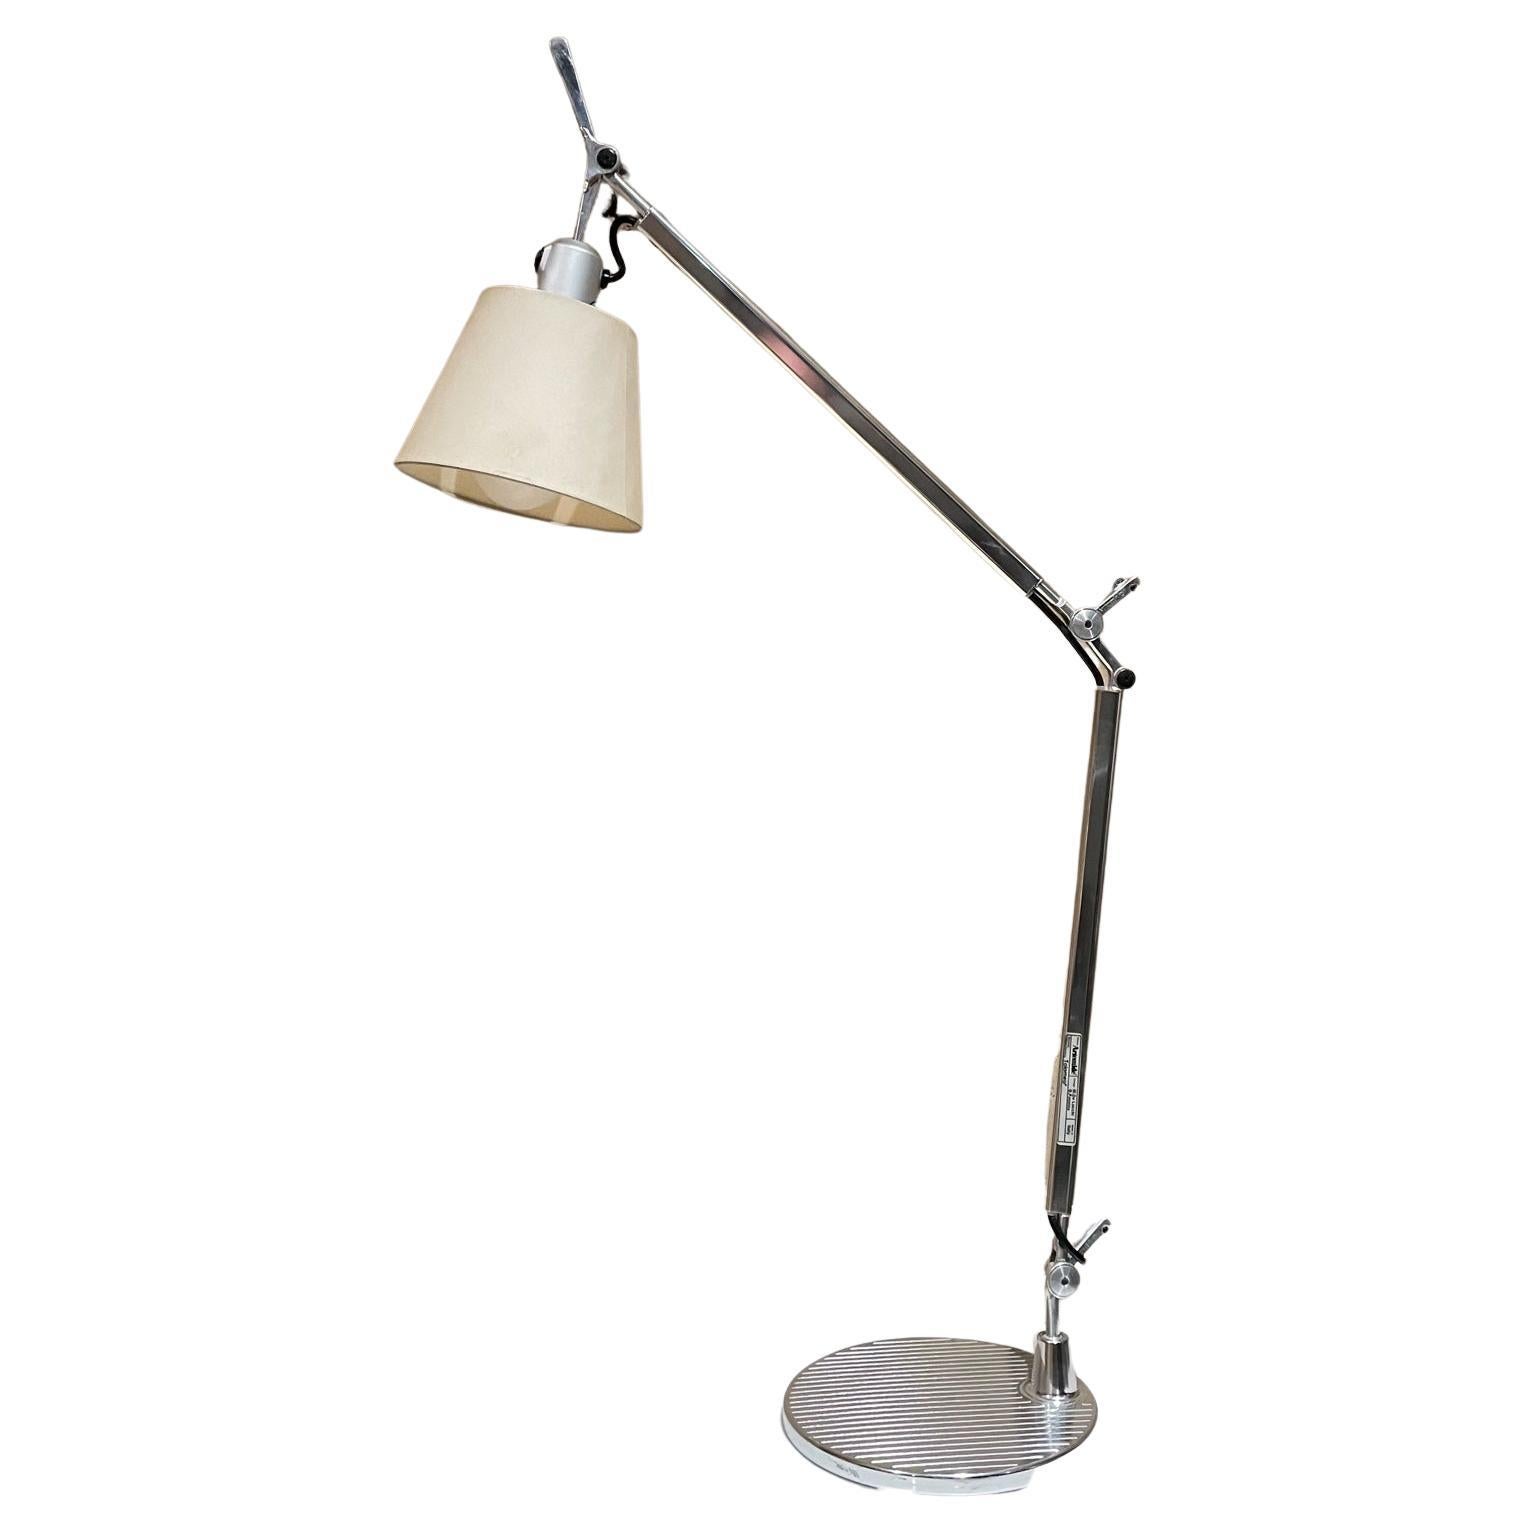 1980s Adjustable Table Lamp Tolomeo for Artemide Milano Italy 